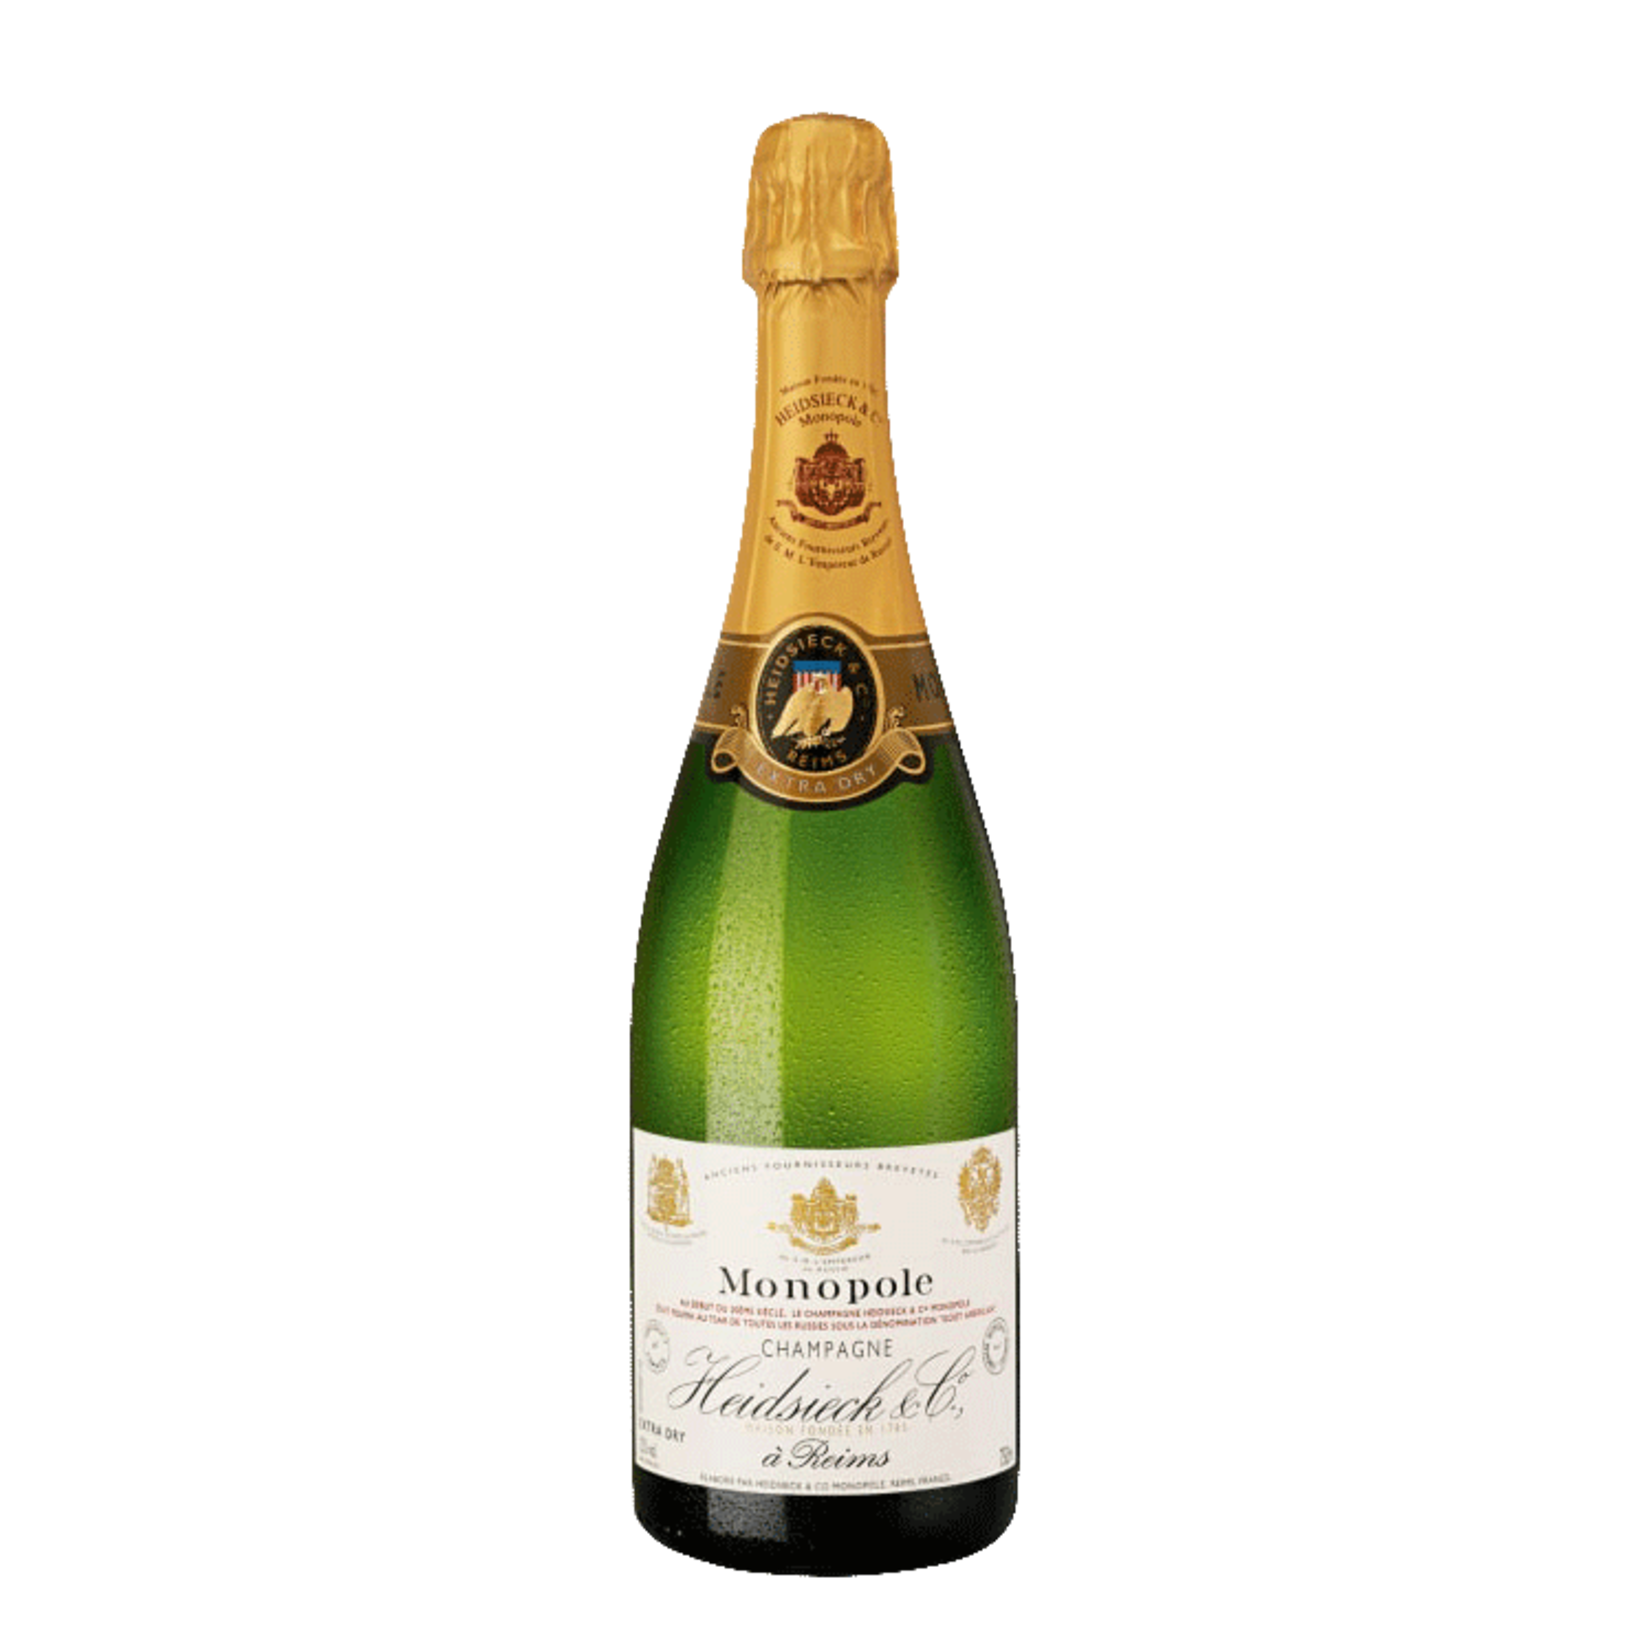 Sparkling Heidsieck Monopole Extra Dry Champagne NV